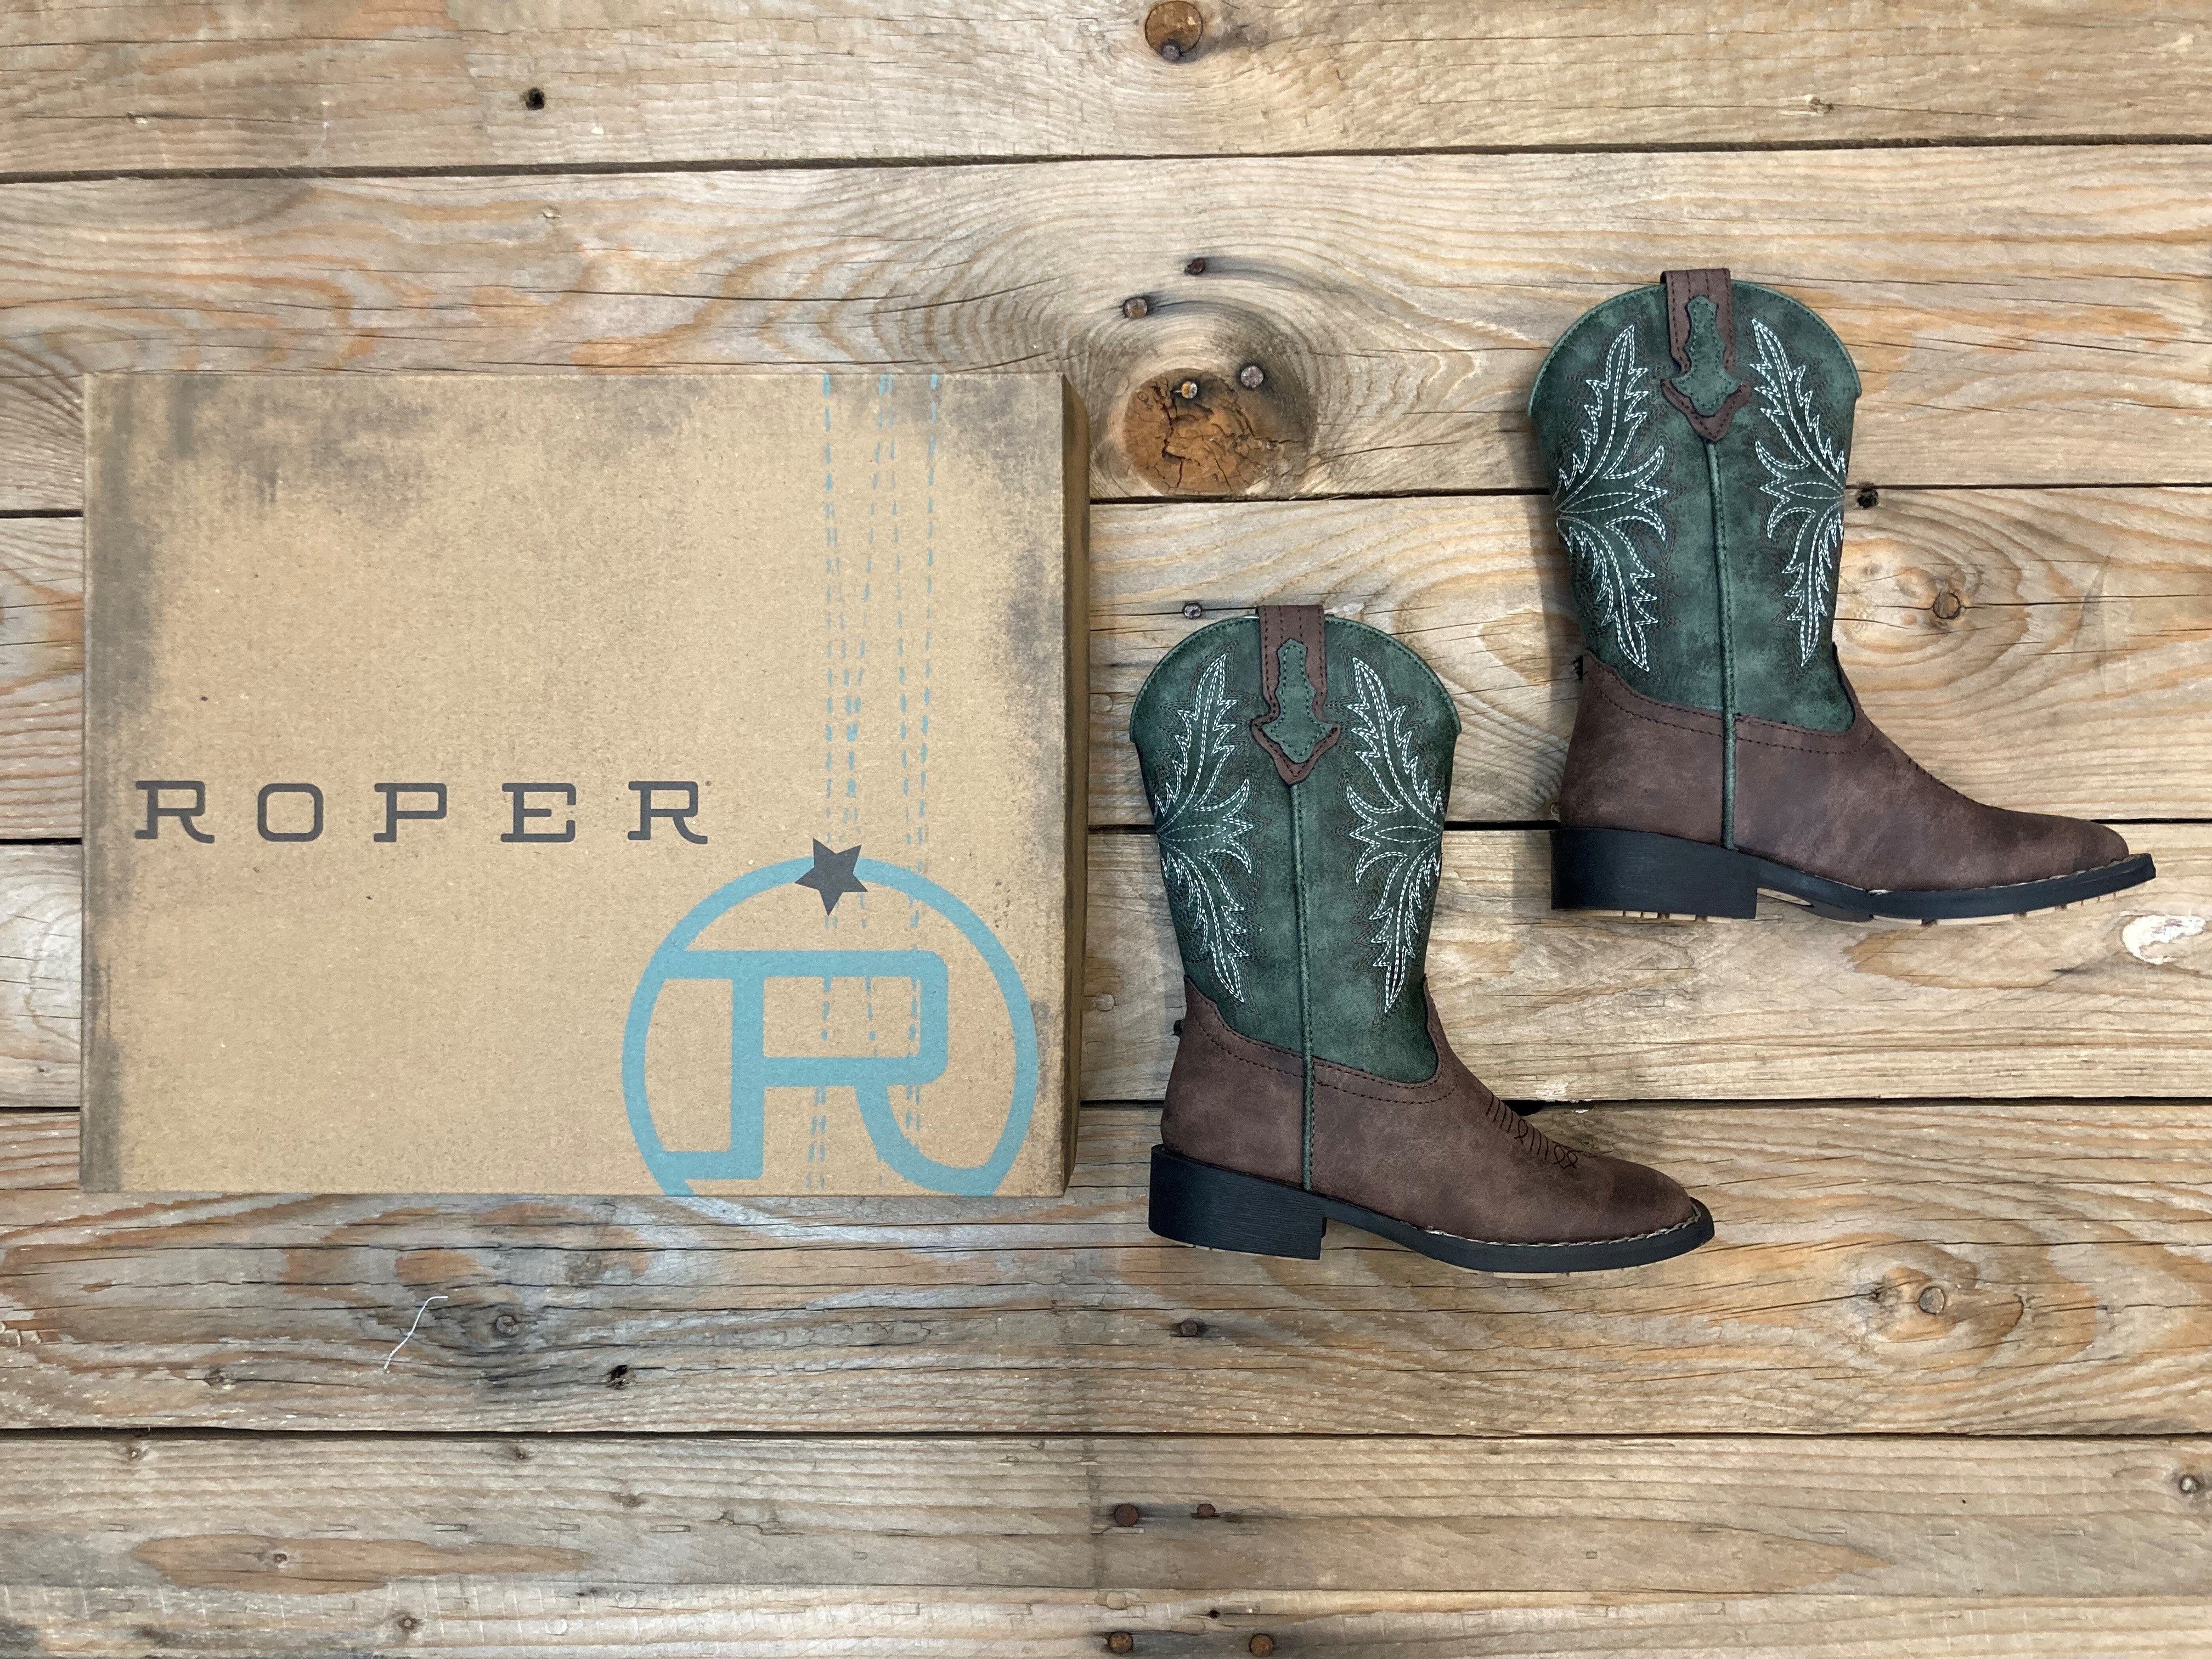 Kids Roper Jed Brown / Green Boot (6857133424717)